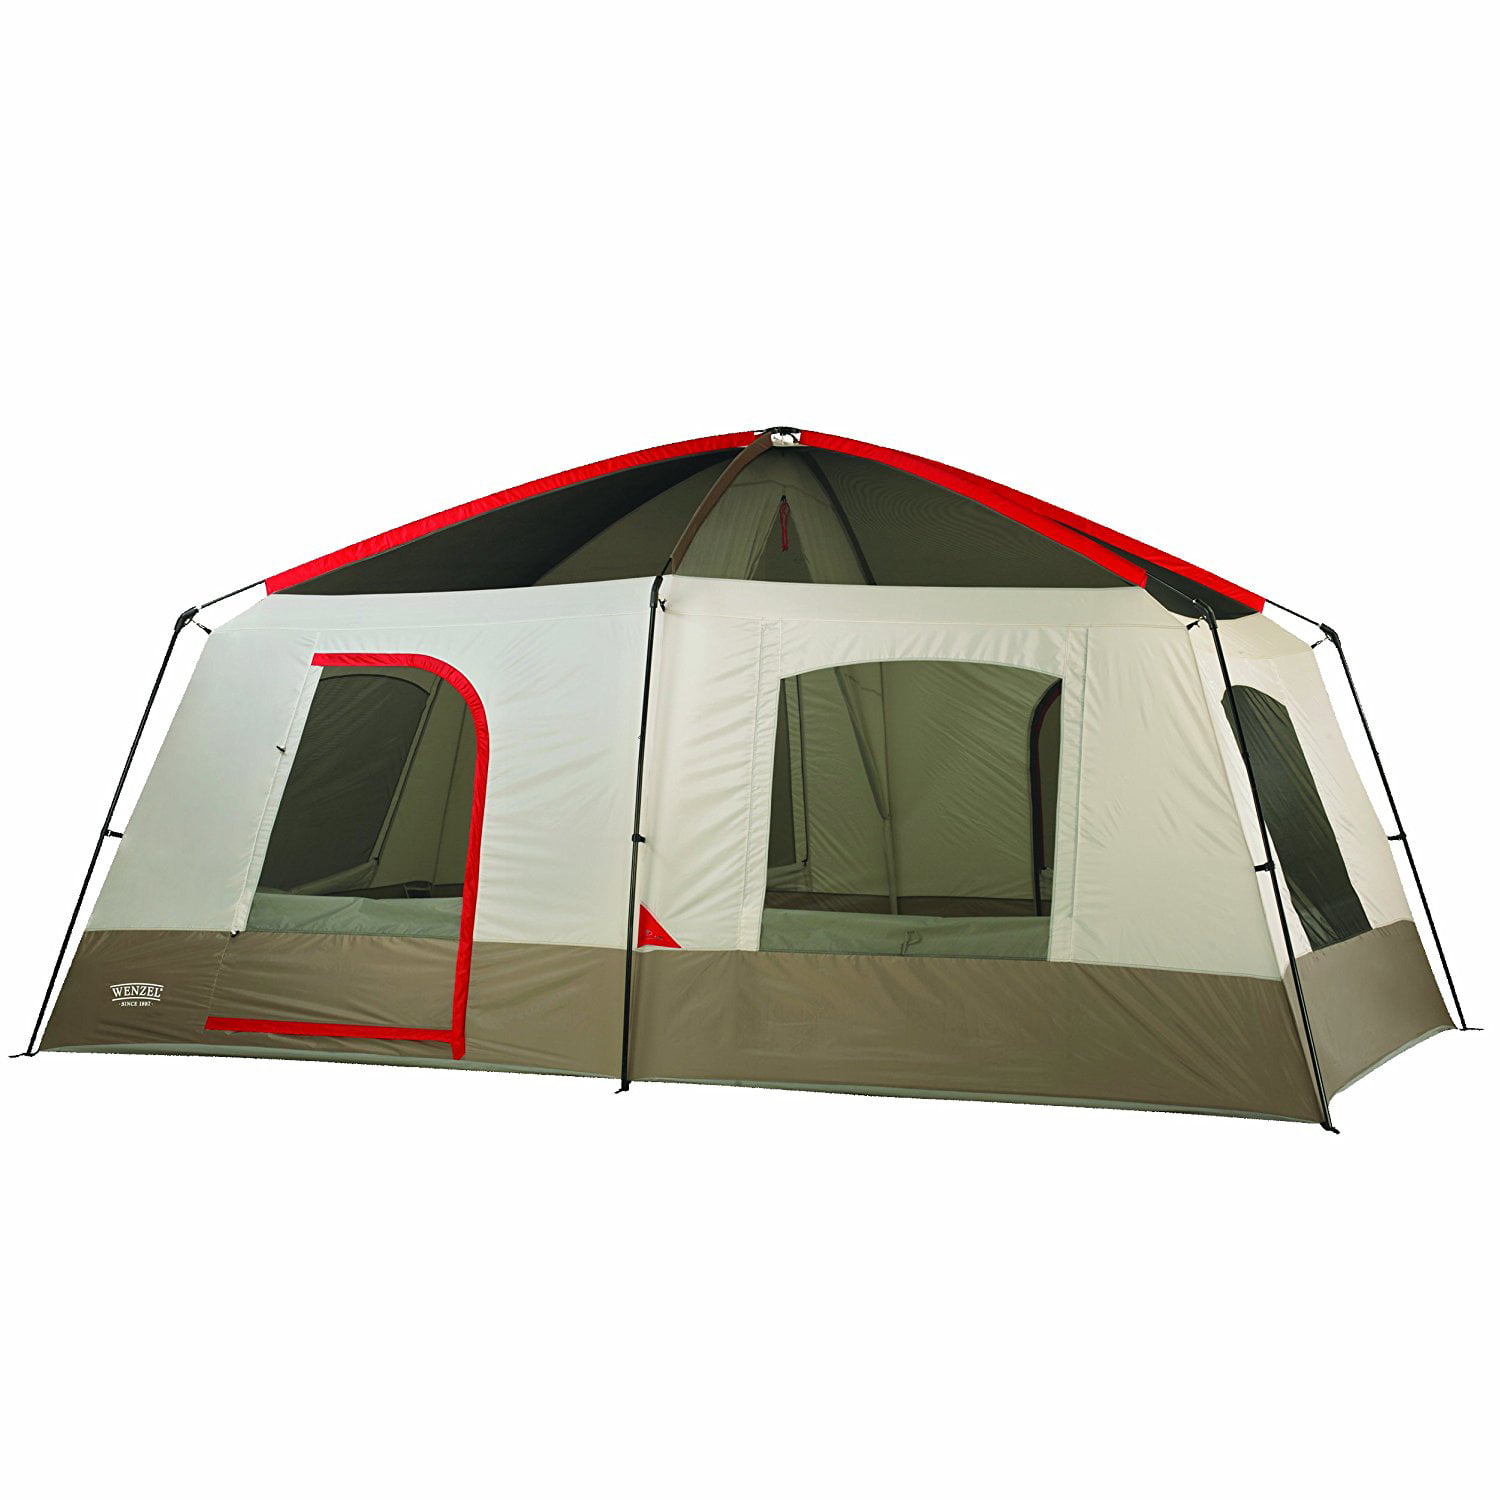 Timber Ridge Large Family Tent 10 Person 3 Seasons for Camping with Carry Bag and Rain Flysheet 2 Rooms 